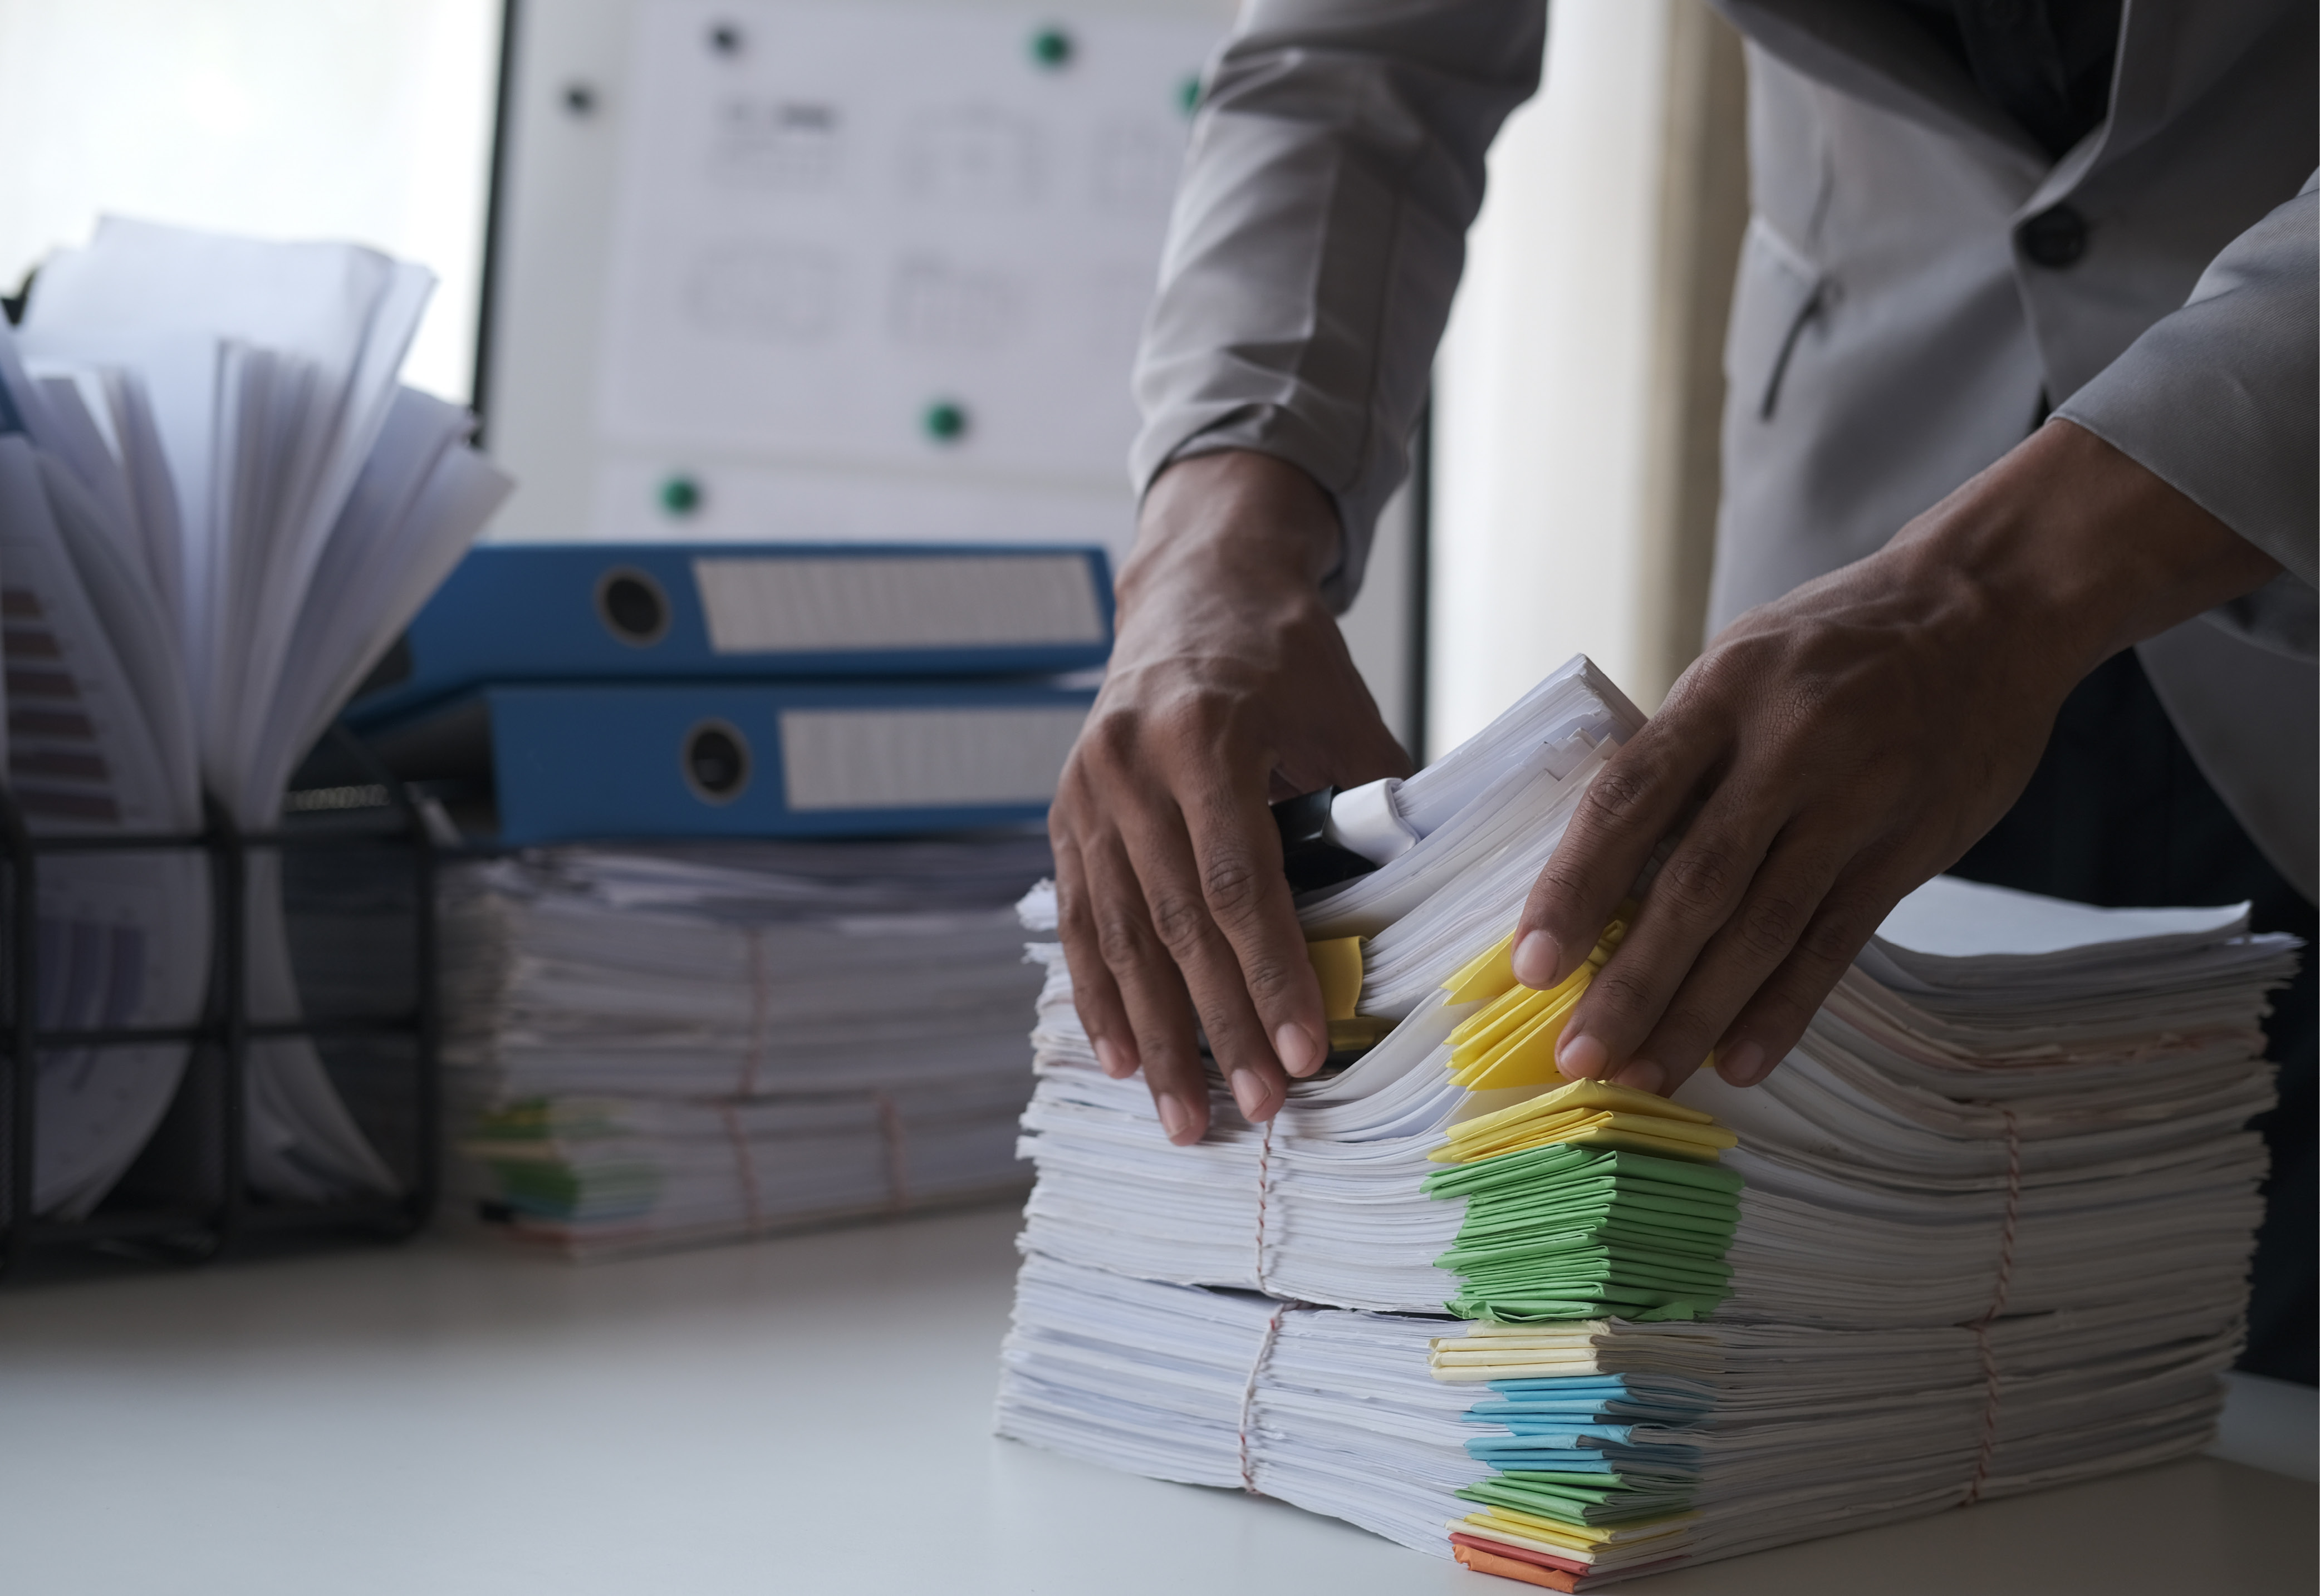 A person holding a stack of papers on a desk